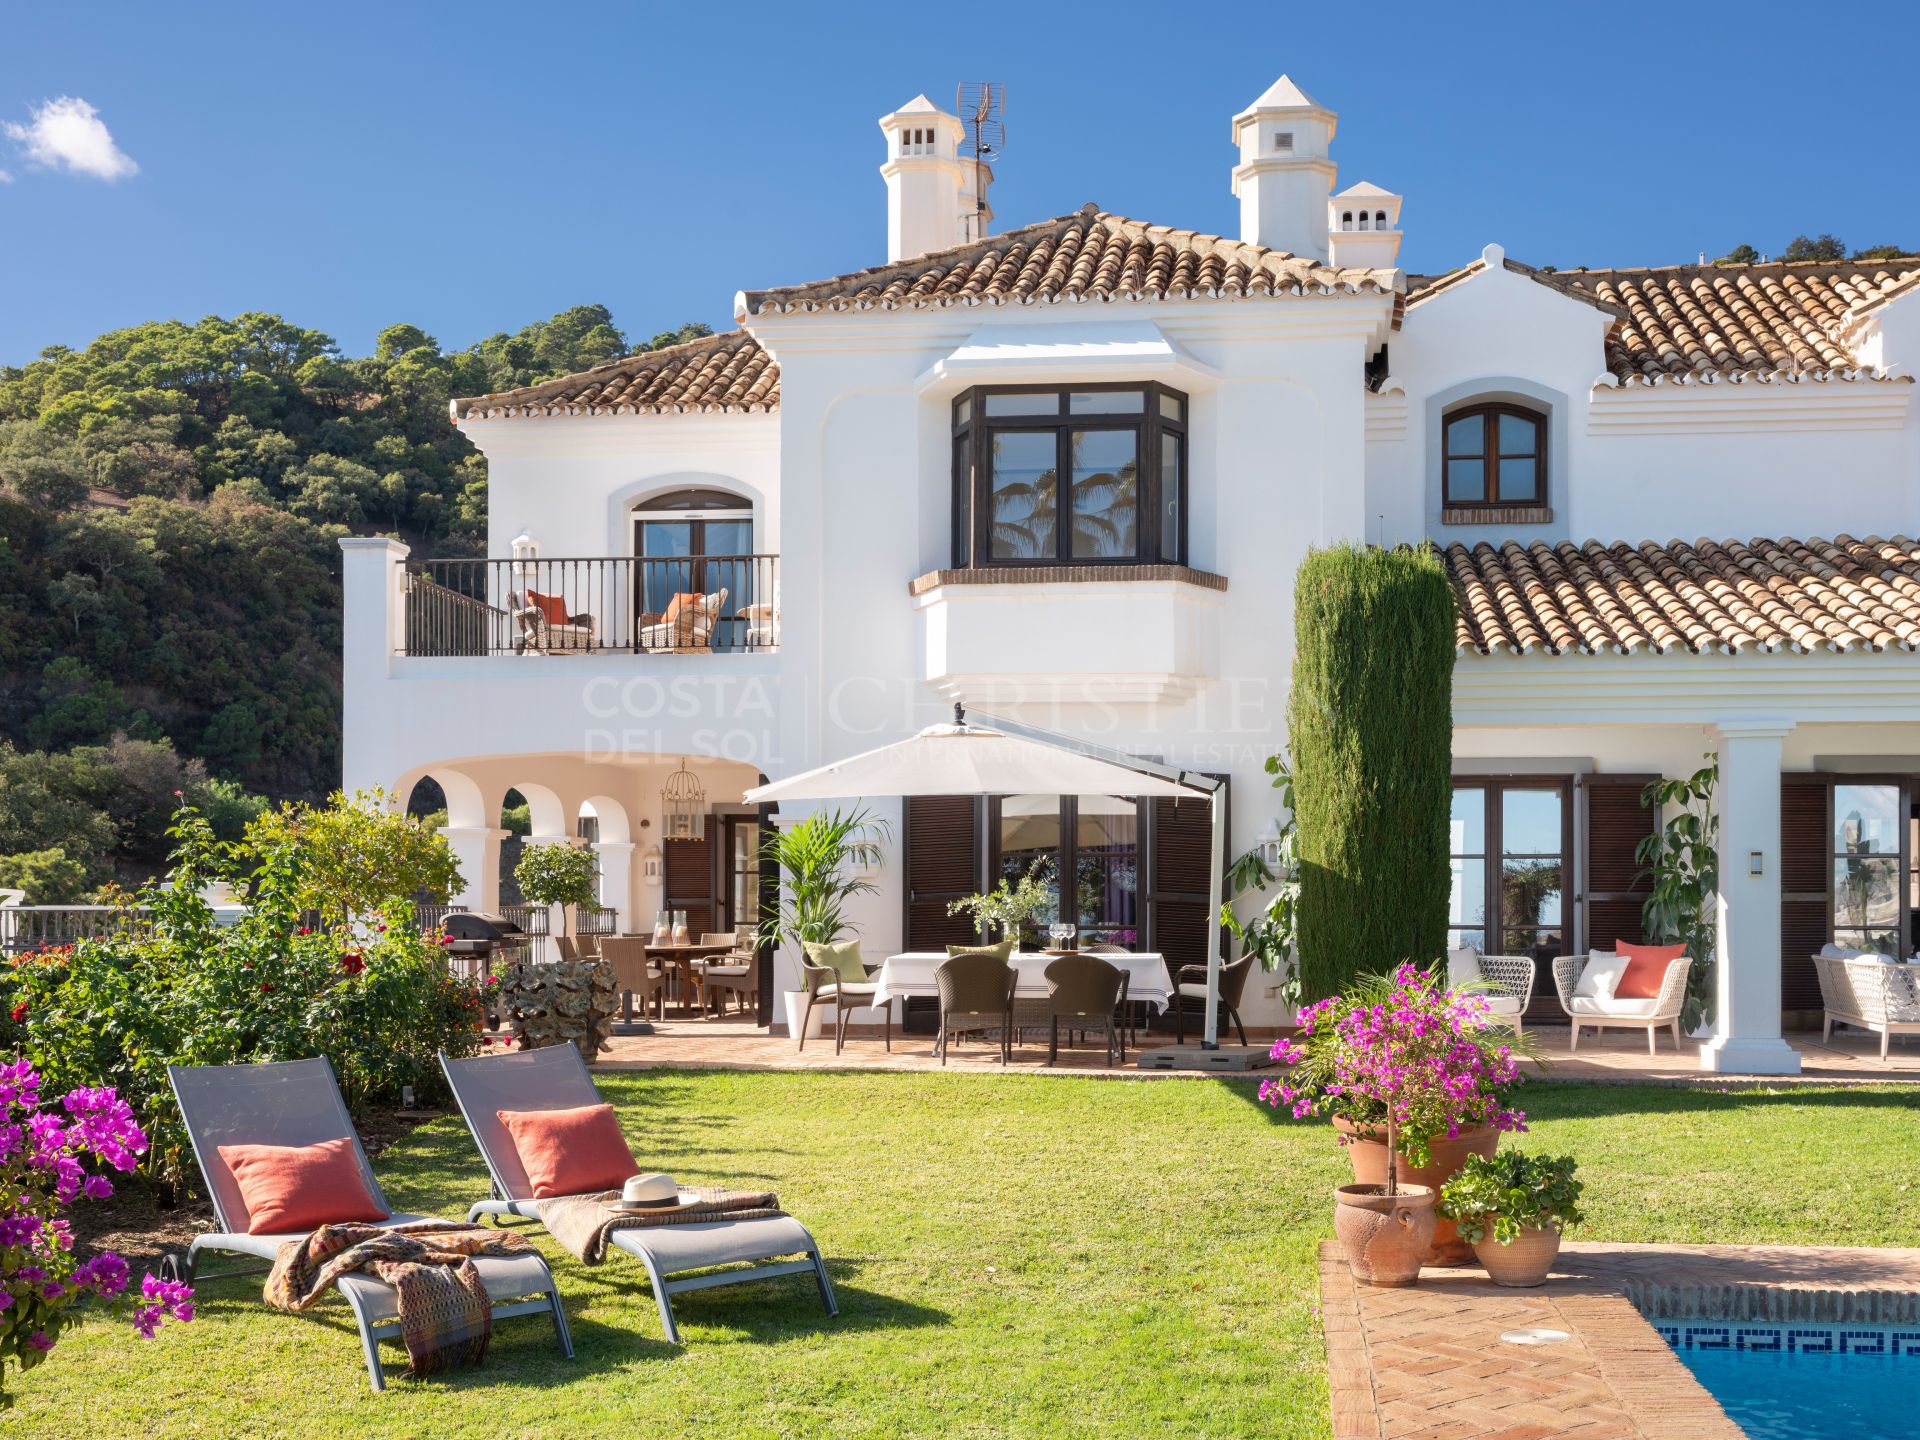 Wonderful luxury villa in the countryside with Andalusian flair | Christie’s International Real Estate